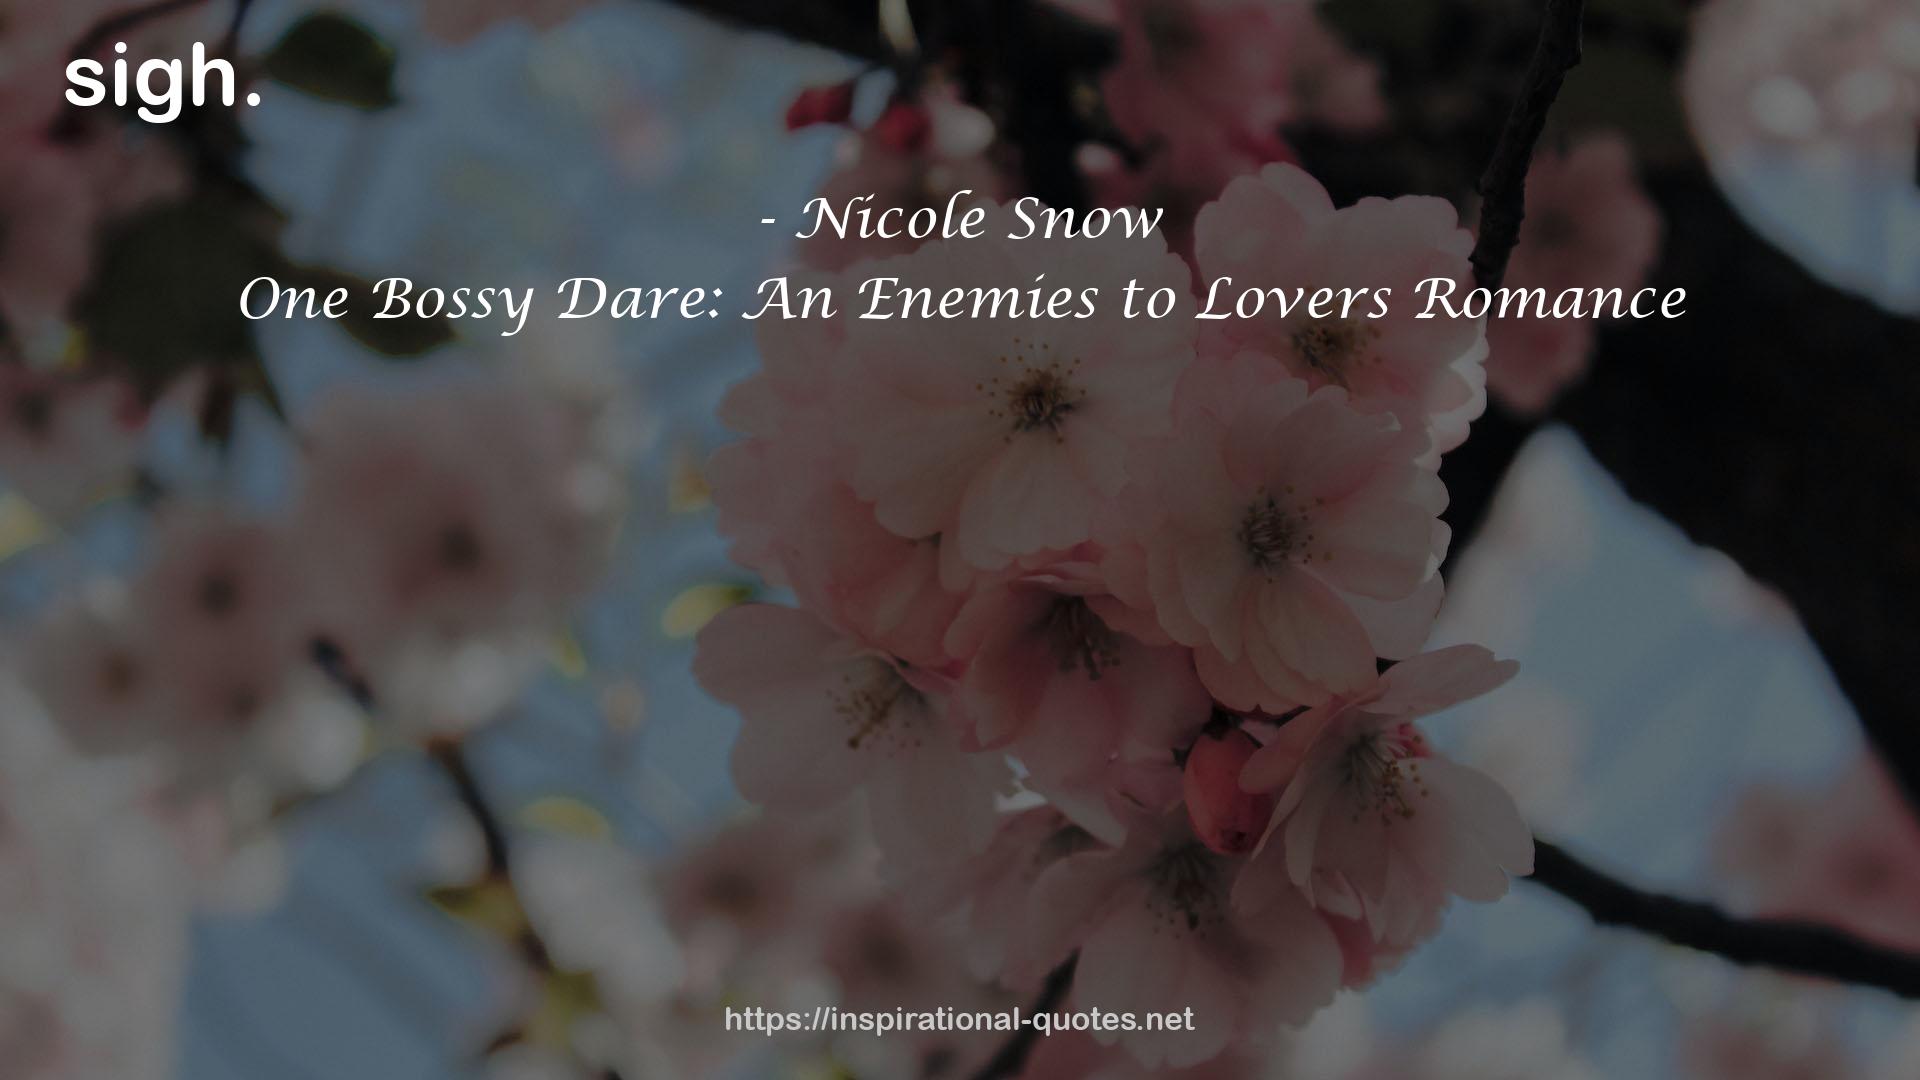 One Bossy Dare: An Enemies to Lovers Romance QUOTES